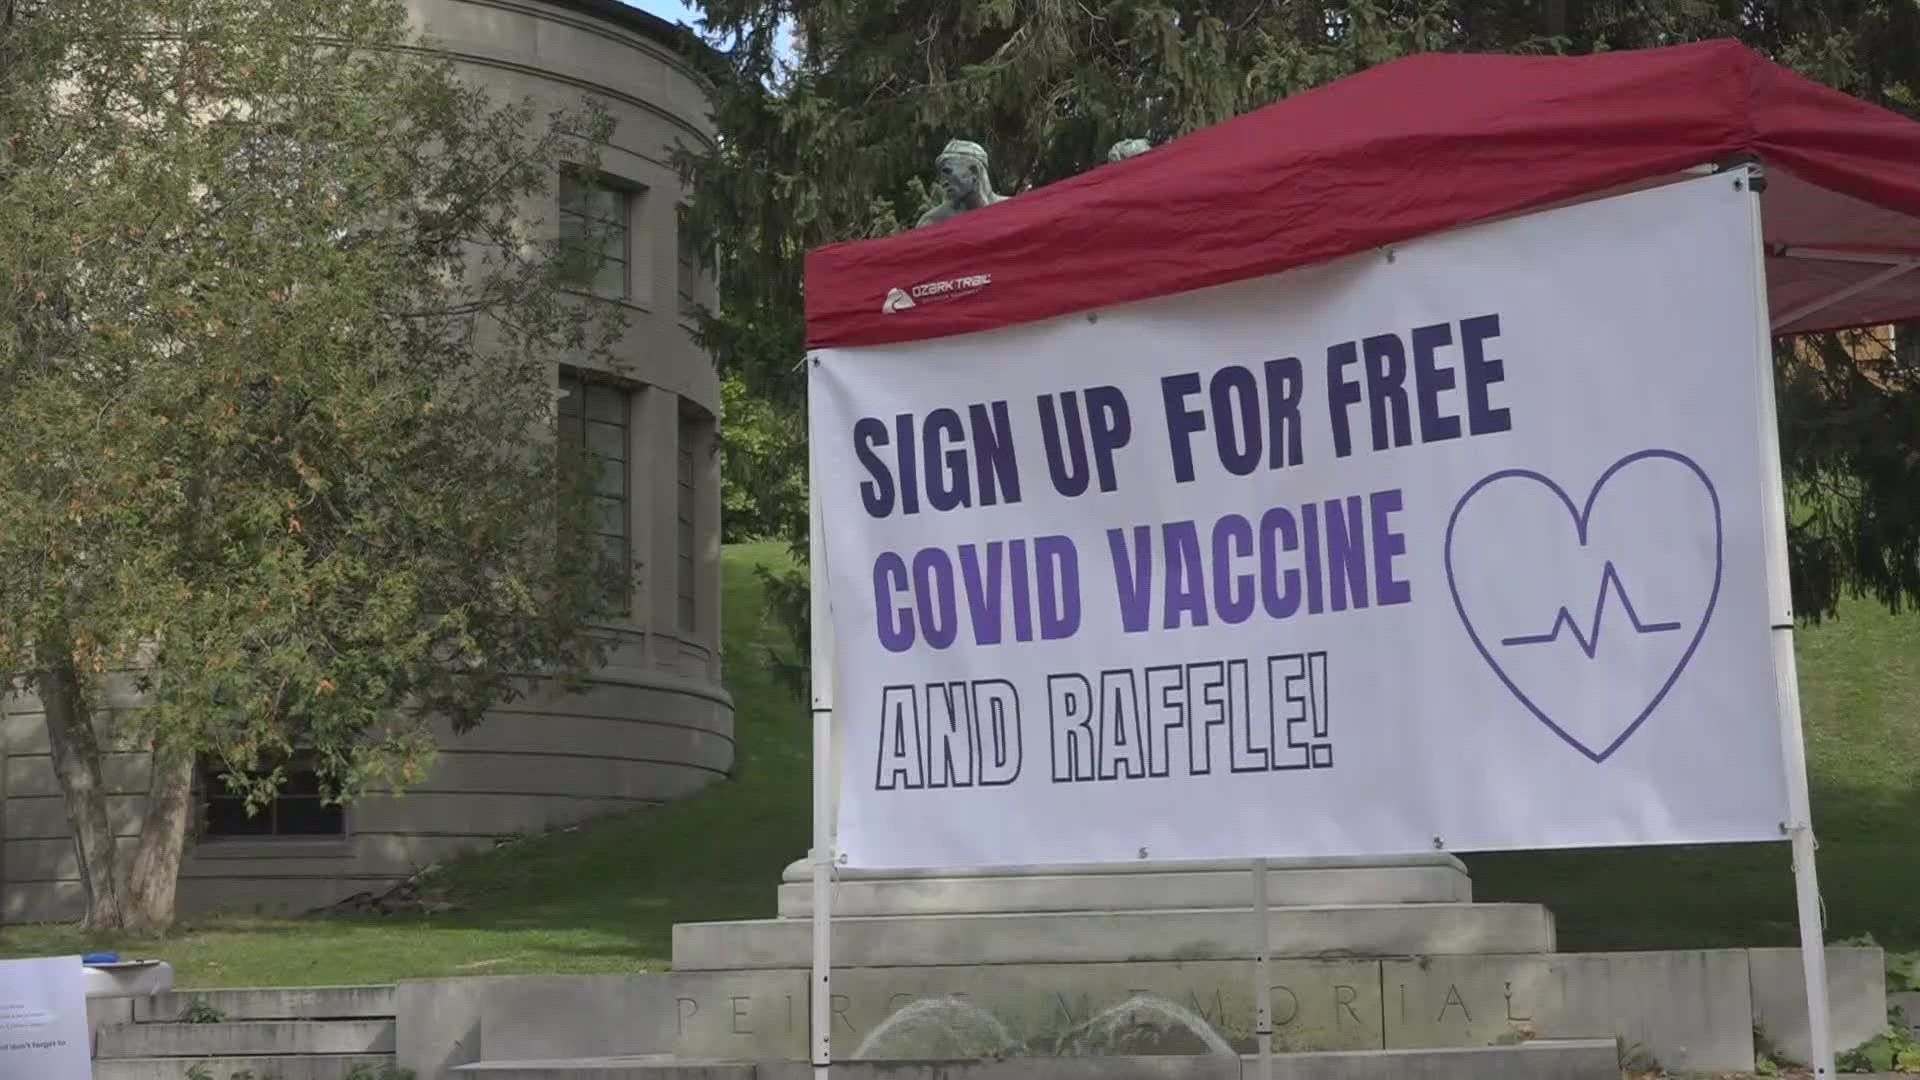 The Maine People's Resource Center hosted an event to educate more Mainers about the COVID vaccine.